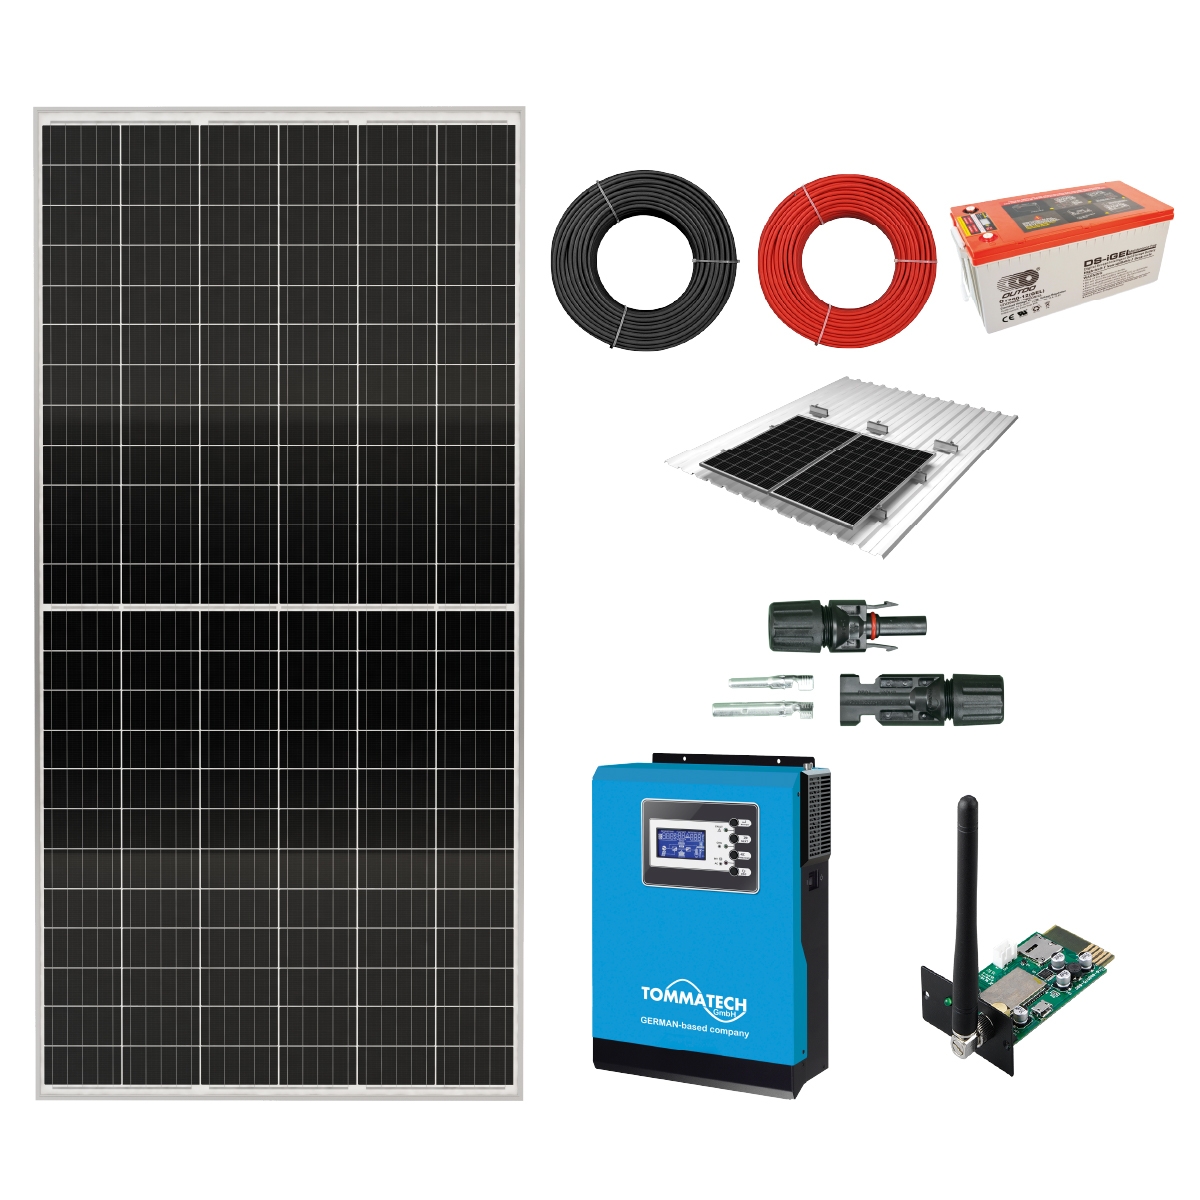 1kW / 455Wp / 2.4kWh / 1~ MPPT Solar Off-Grid Solution